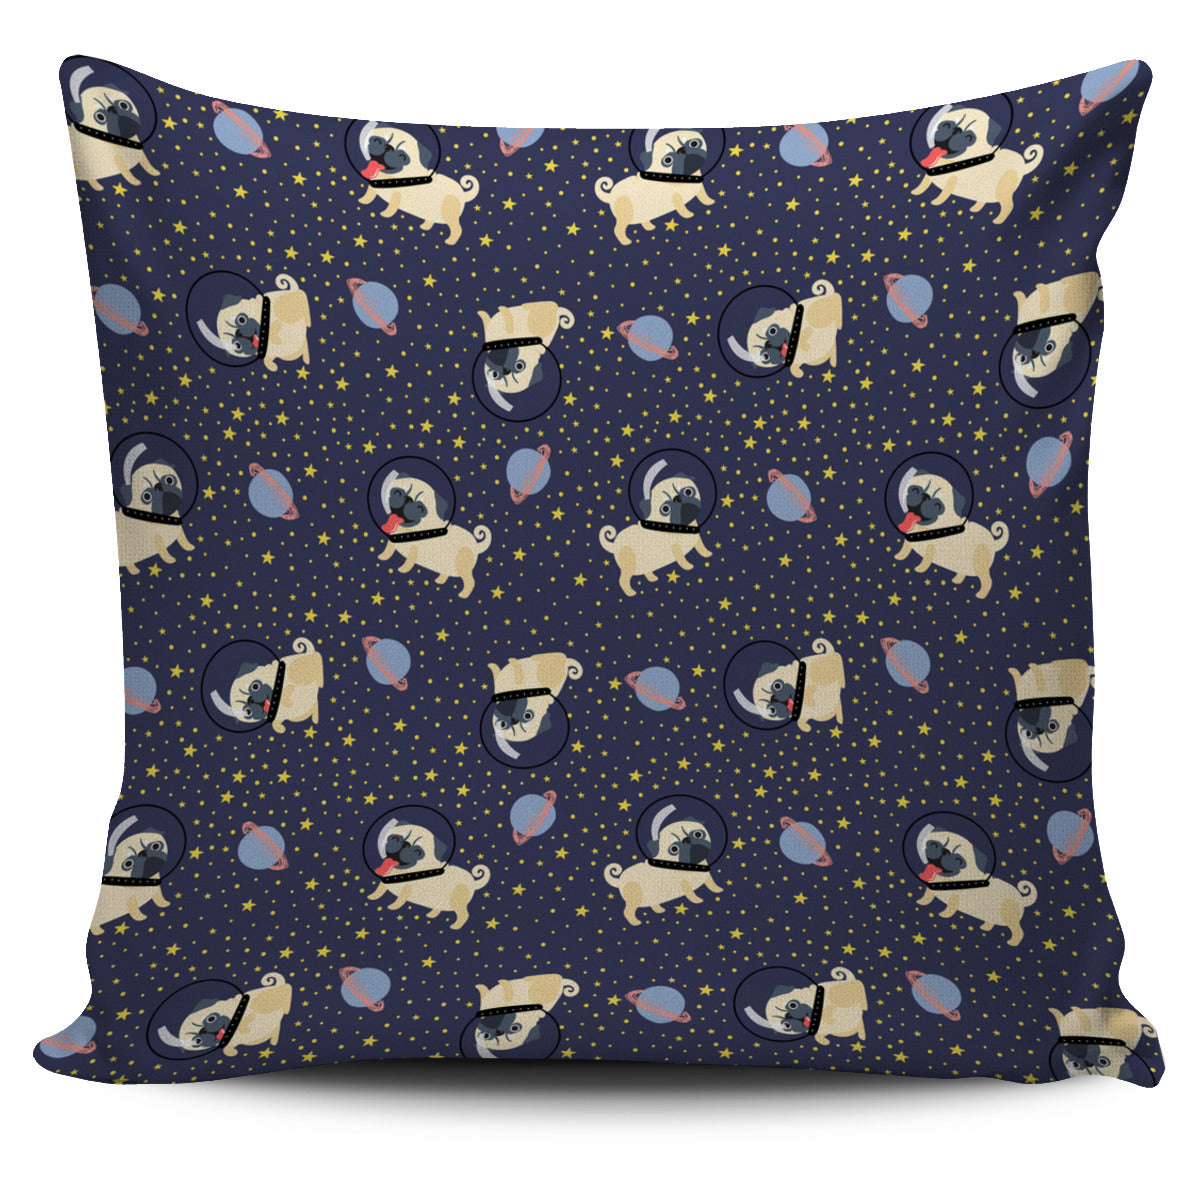 Space Pug Pillow Cover